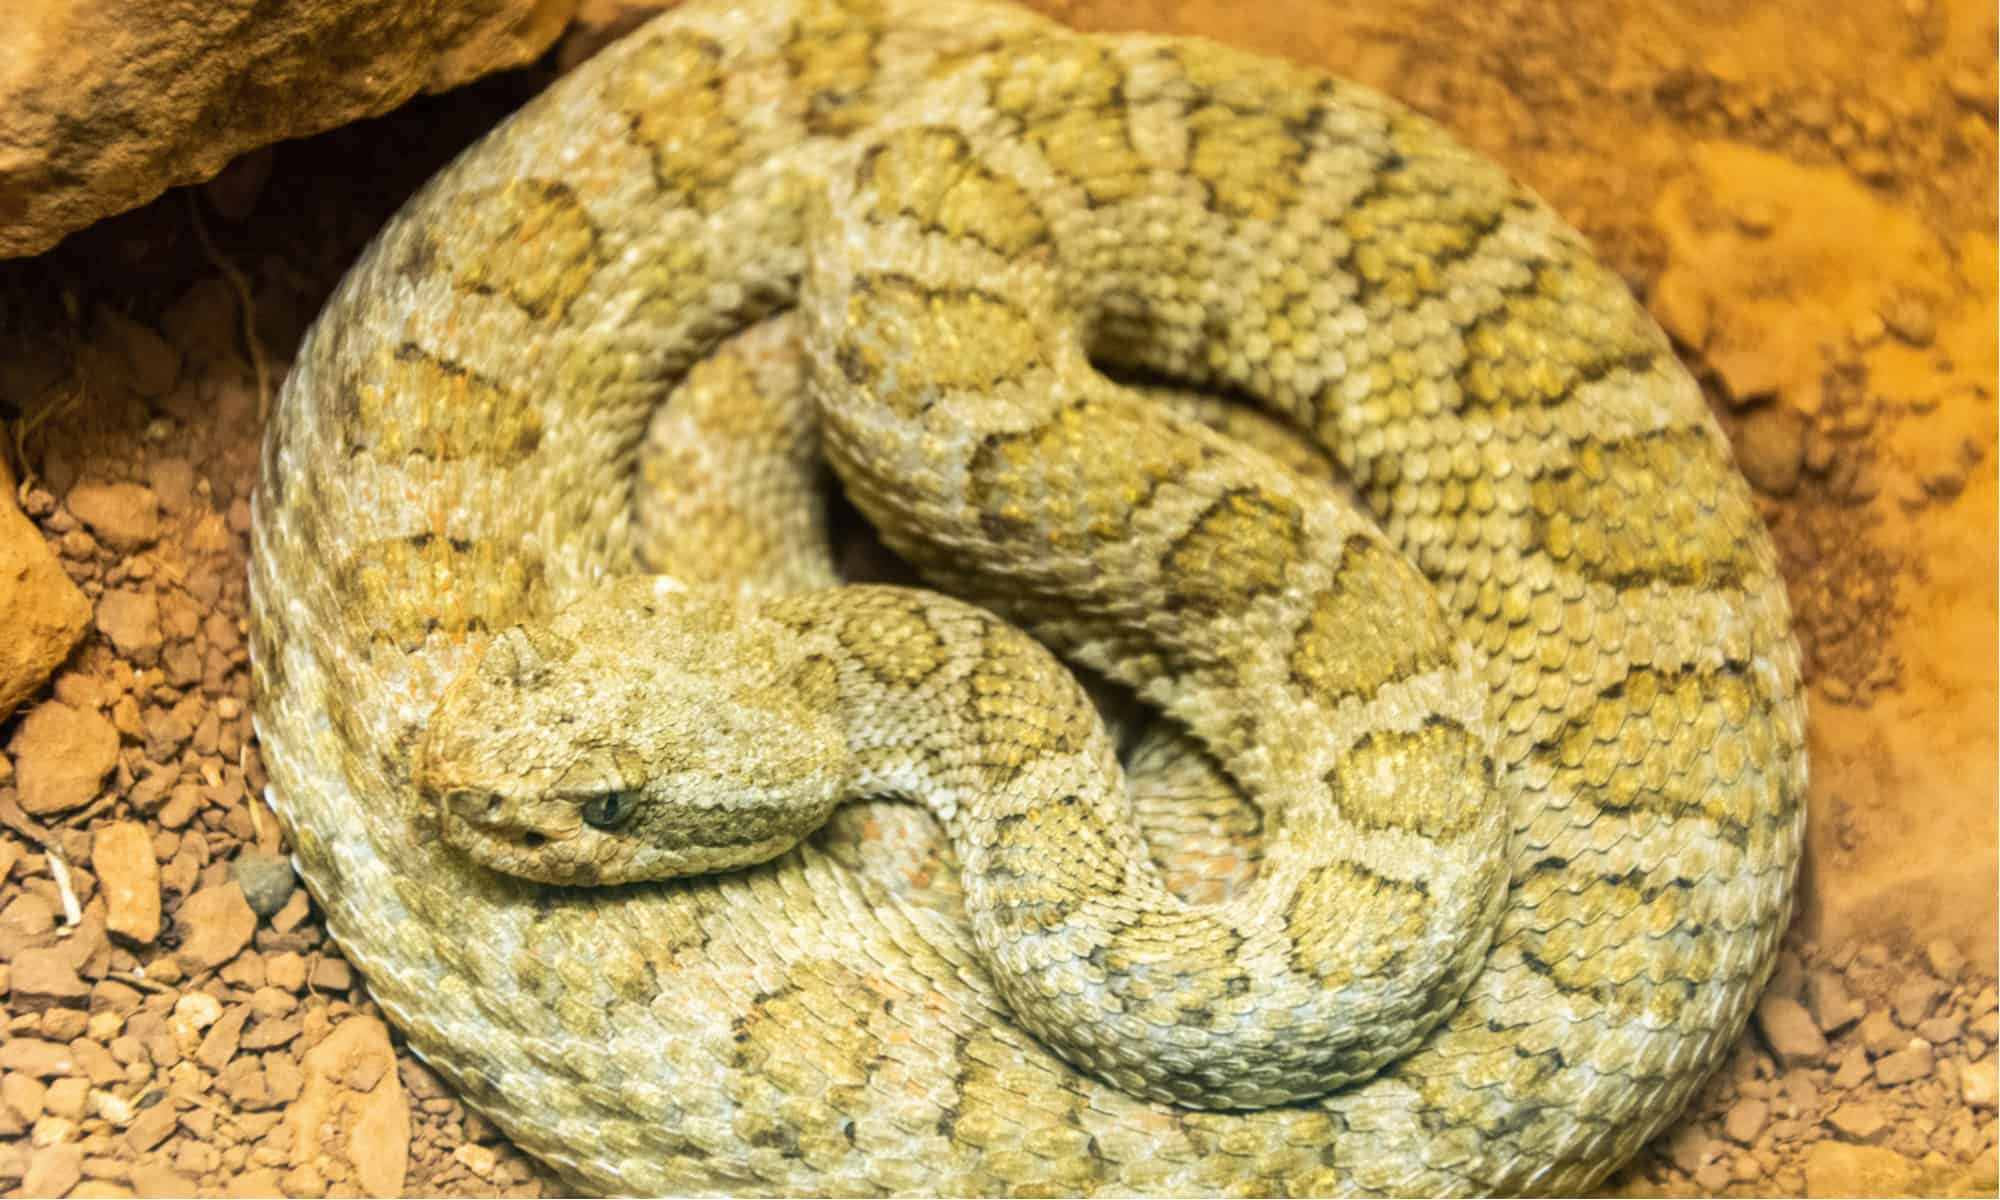 Snake Phobia: What's the Fear of Snakes and Why Do So Many People Have it?  - AZ Animals